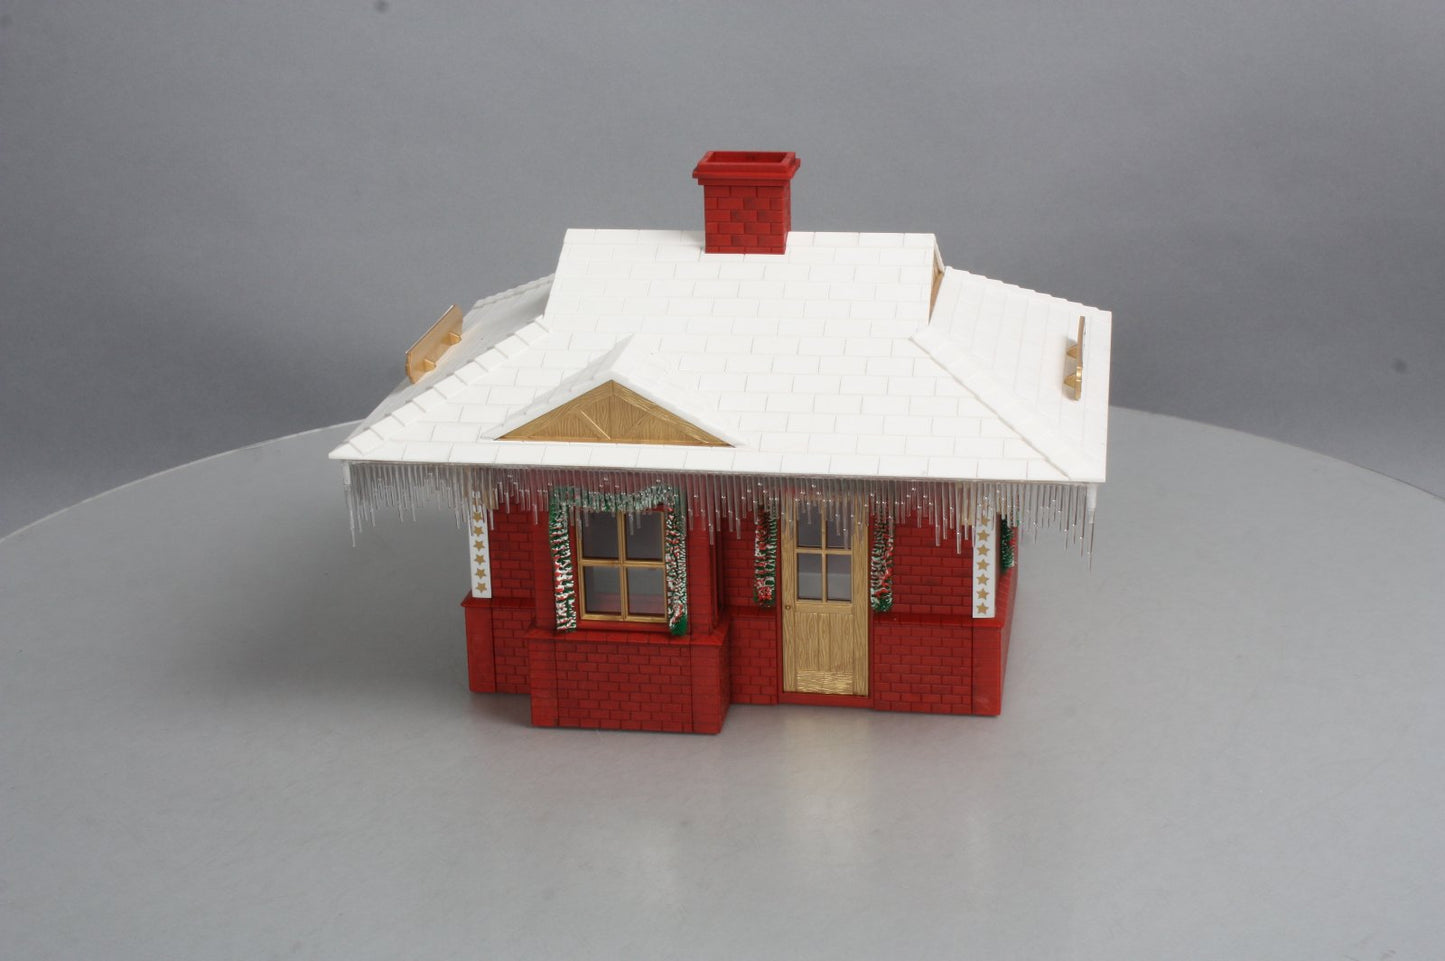 Piko 62265 G Scale North Pole Station